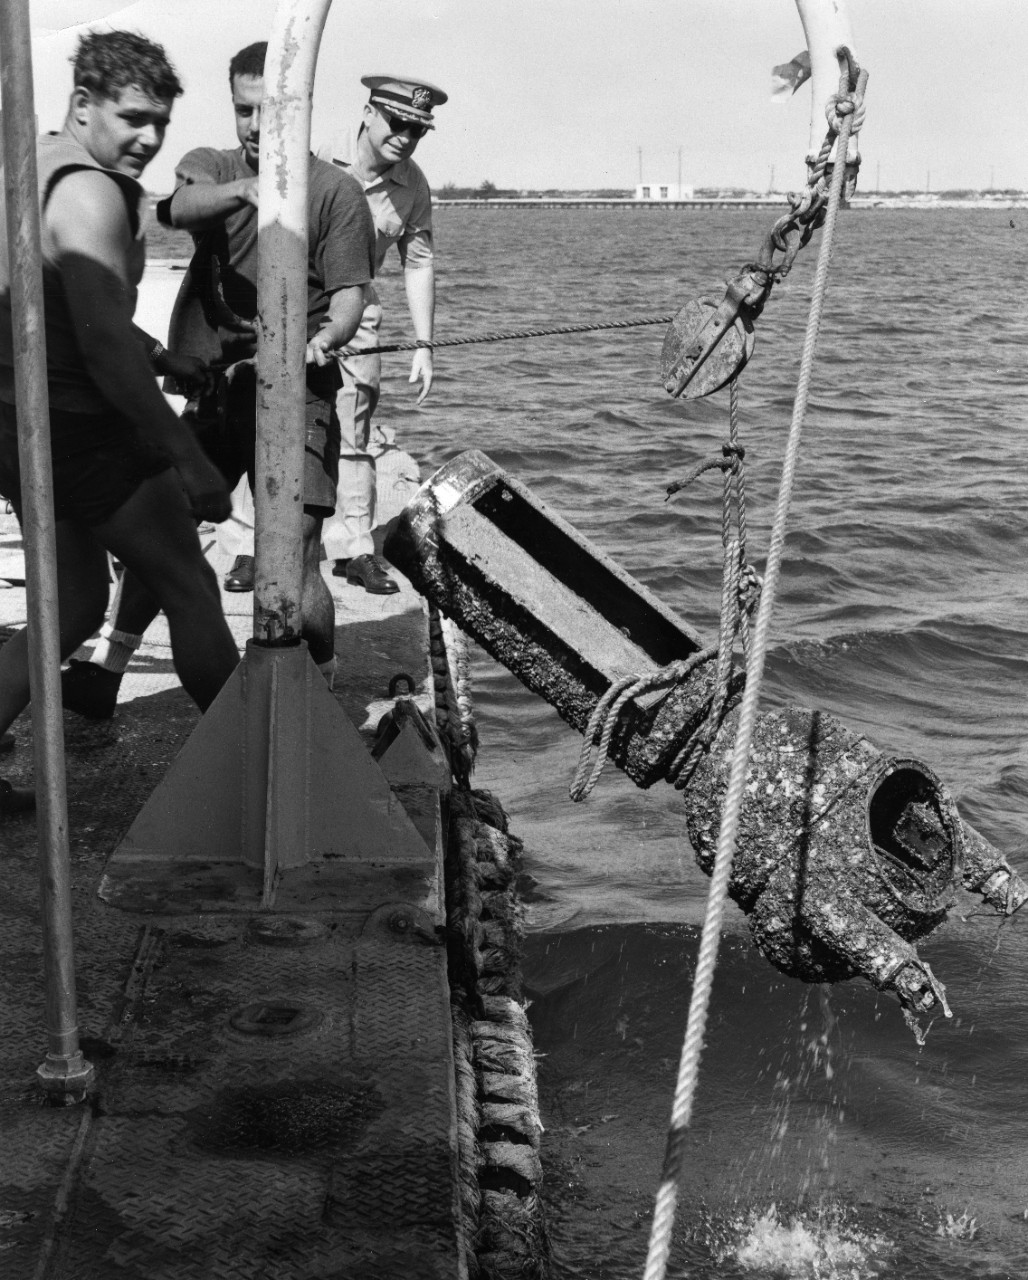 Binnacle from SMS Cormoran is hauled out of the waters of Guam Harbor, 1965. Officer at rear may be Captain W.L. Marshall, Commanding Officer of the Ship Repair Facility.